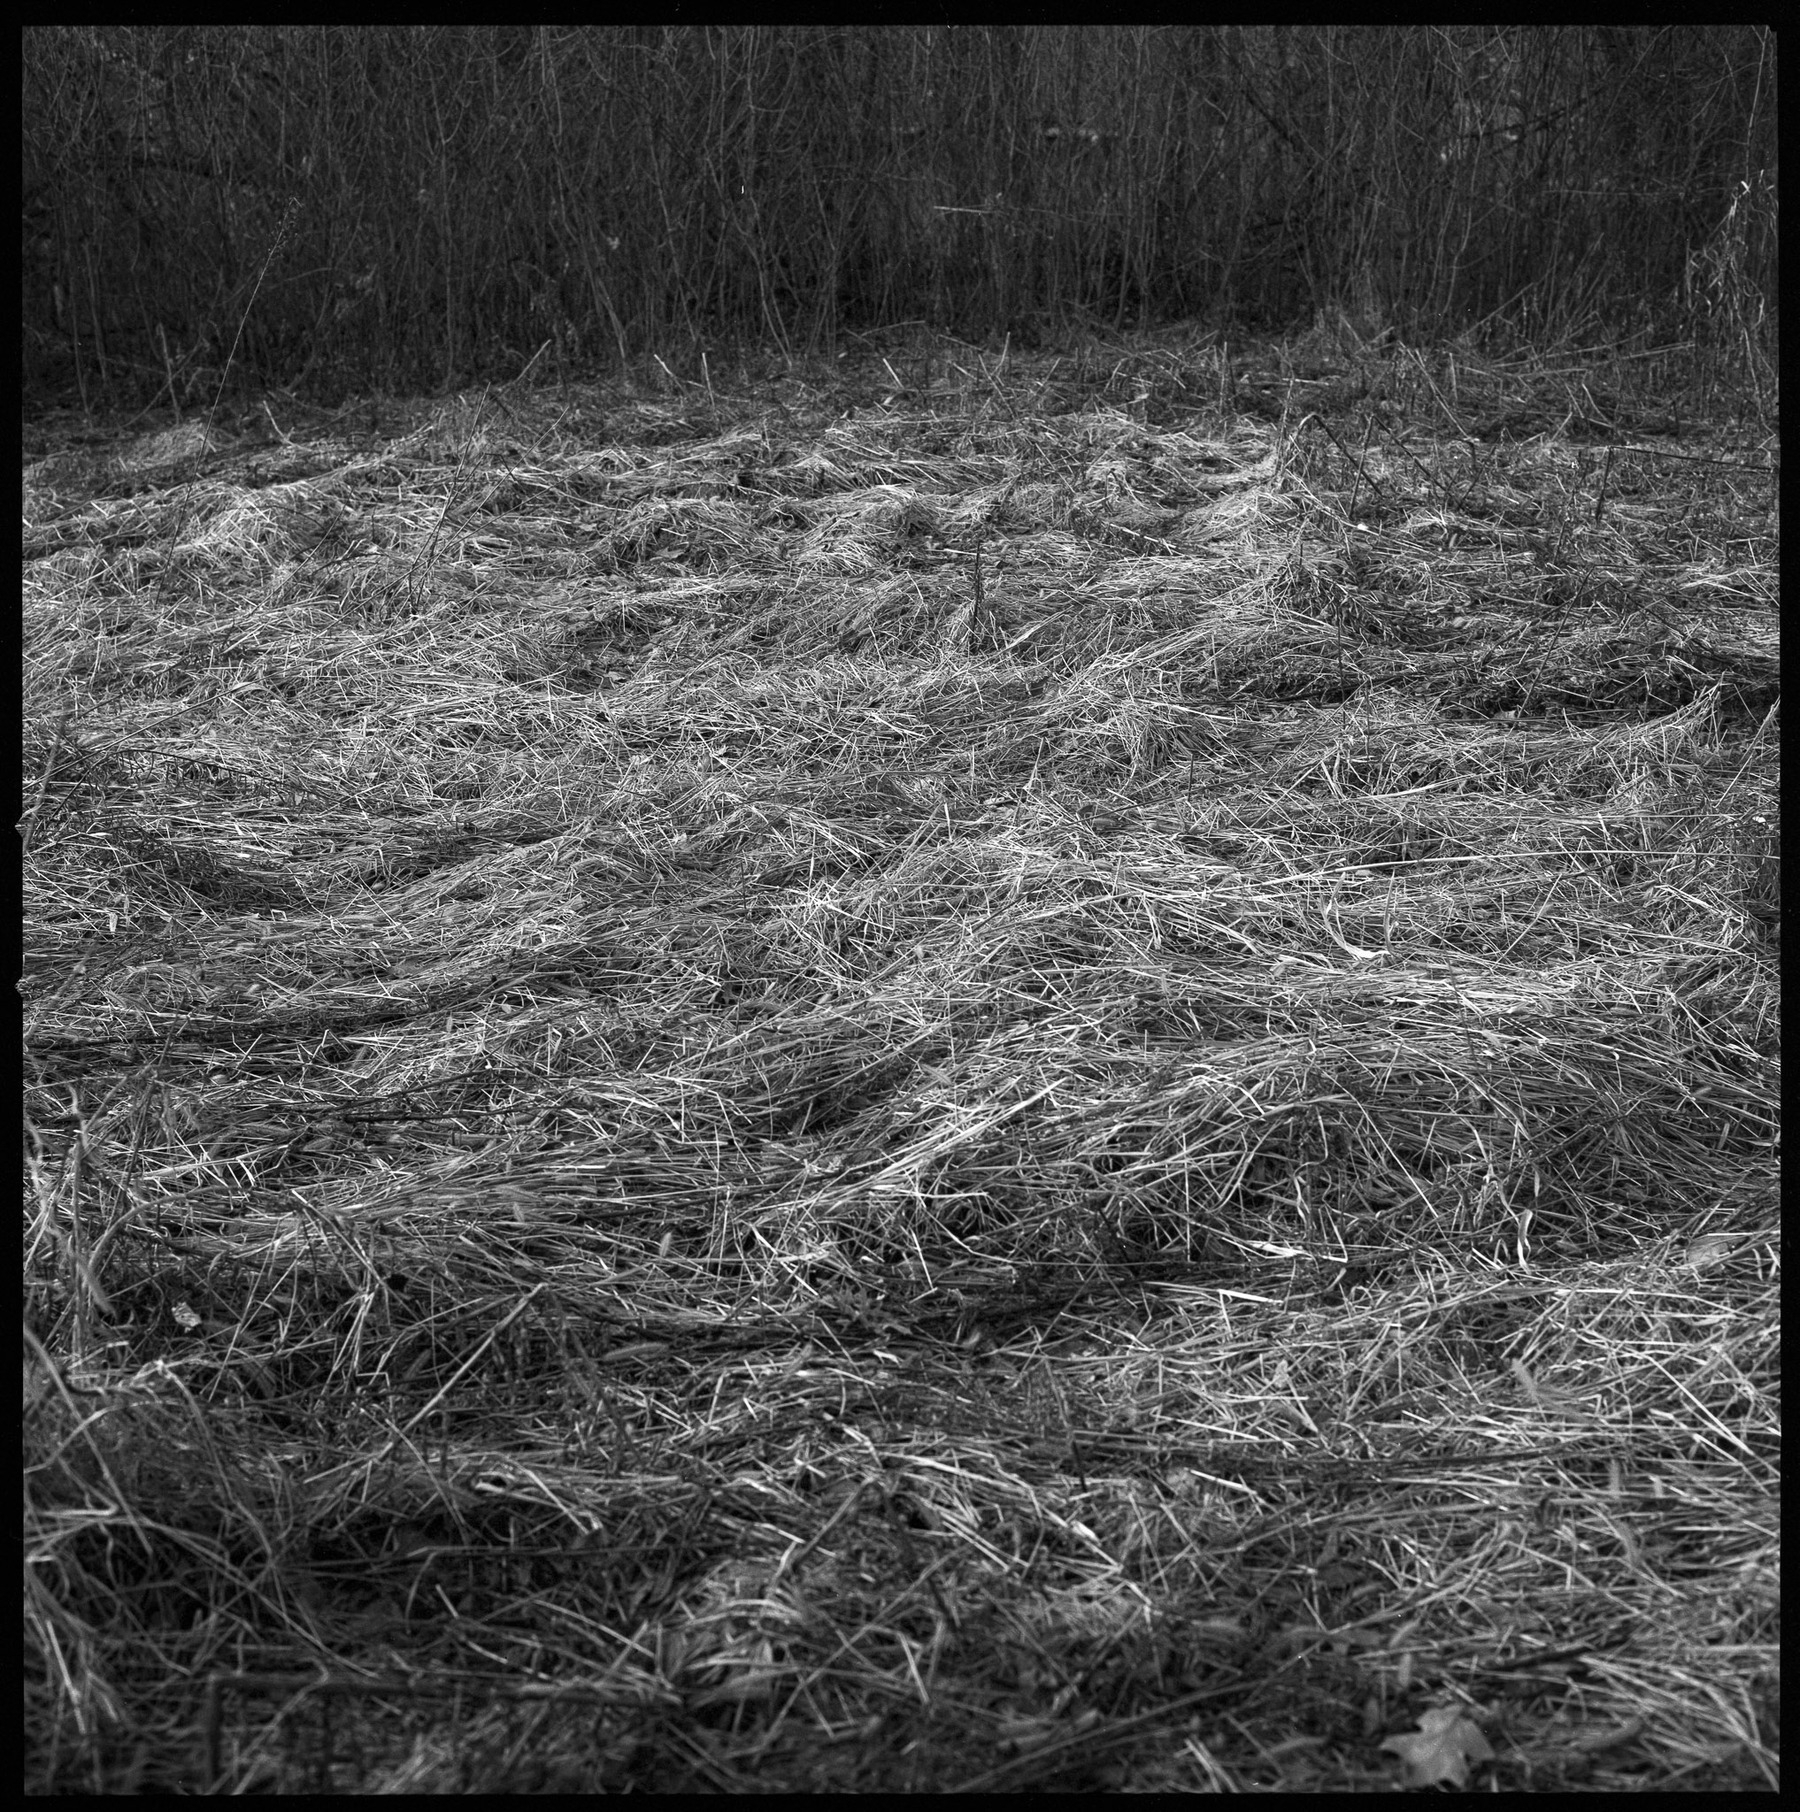 Black and white photo of a field of weeds.